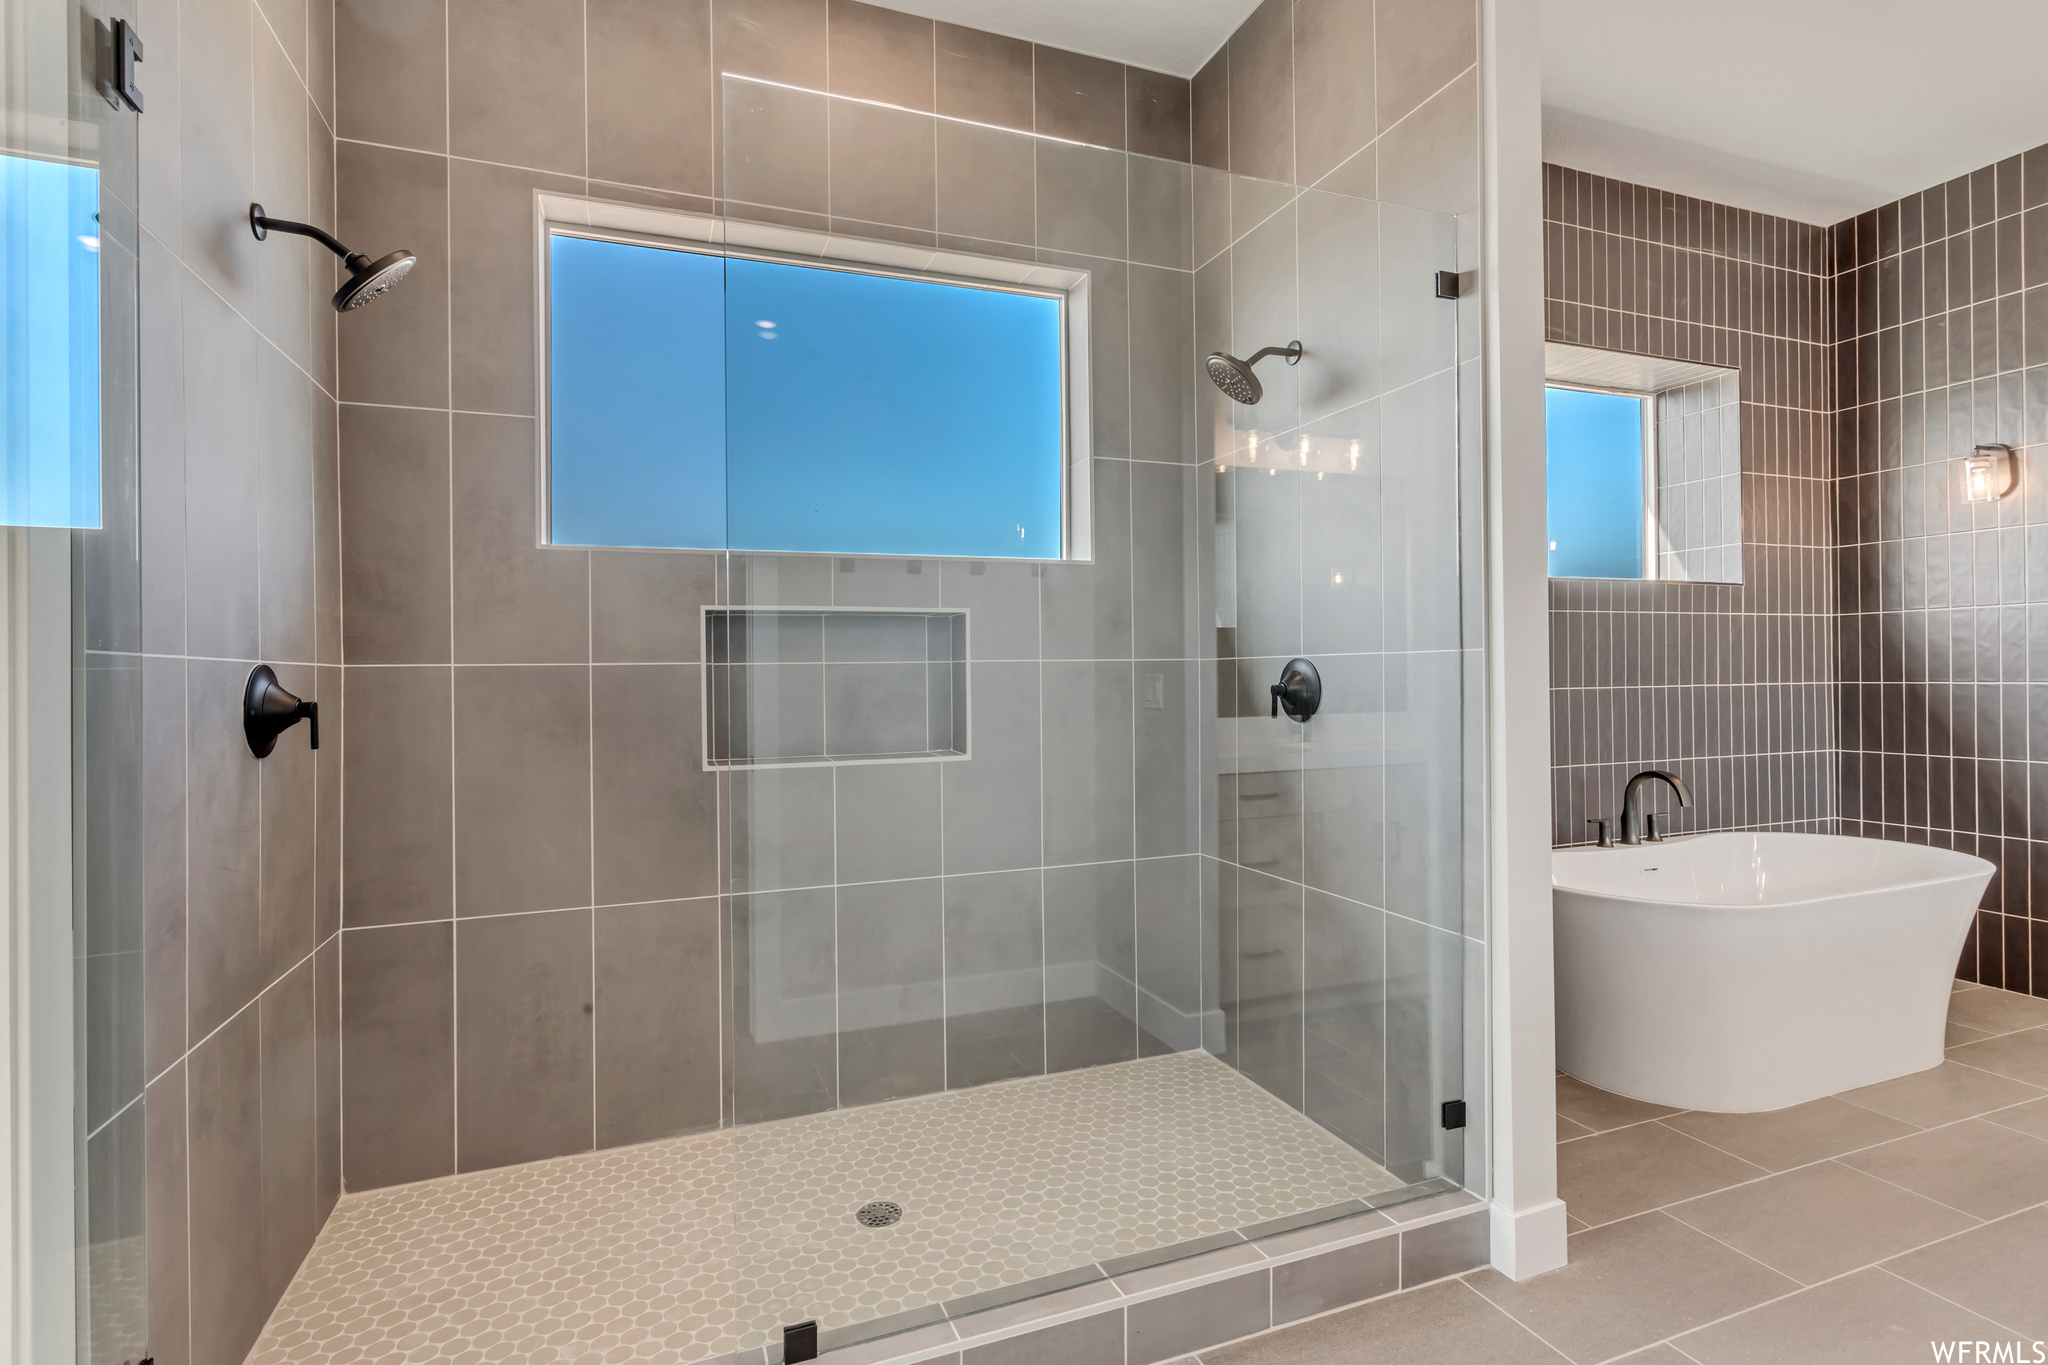 Step in shower with dual shower heads and storage niche for bath products, an optional rain shower and bench can be added